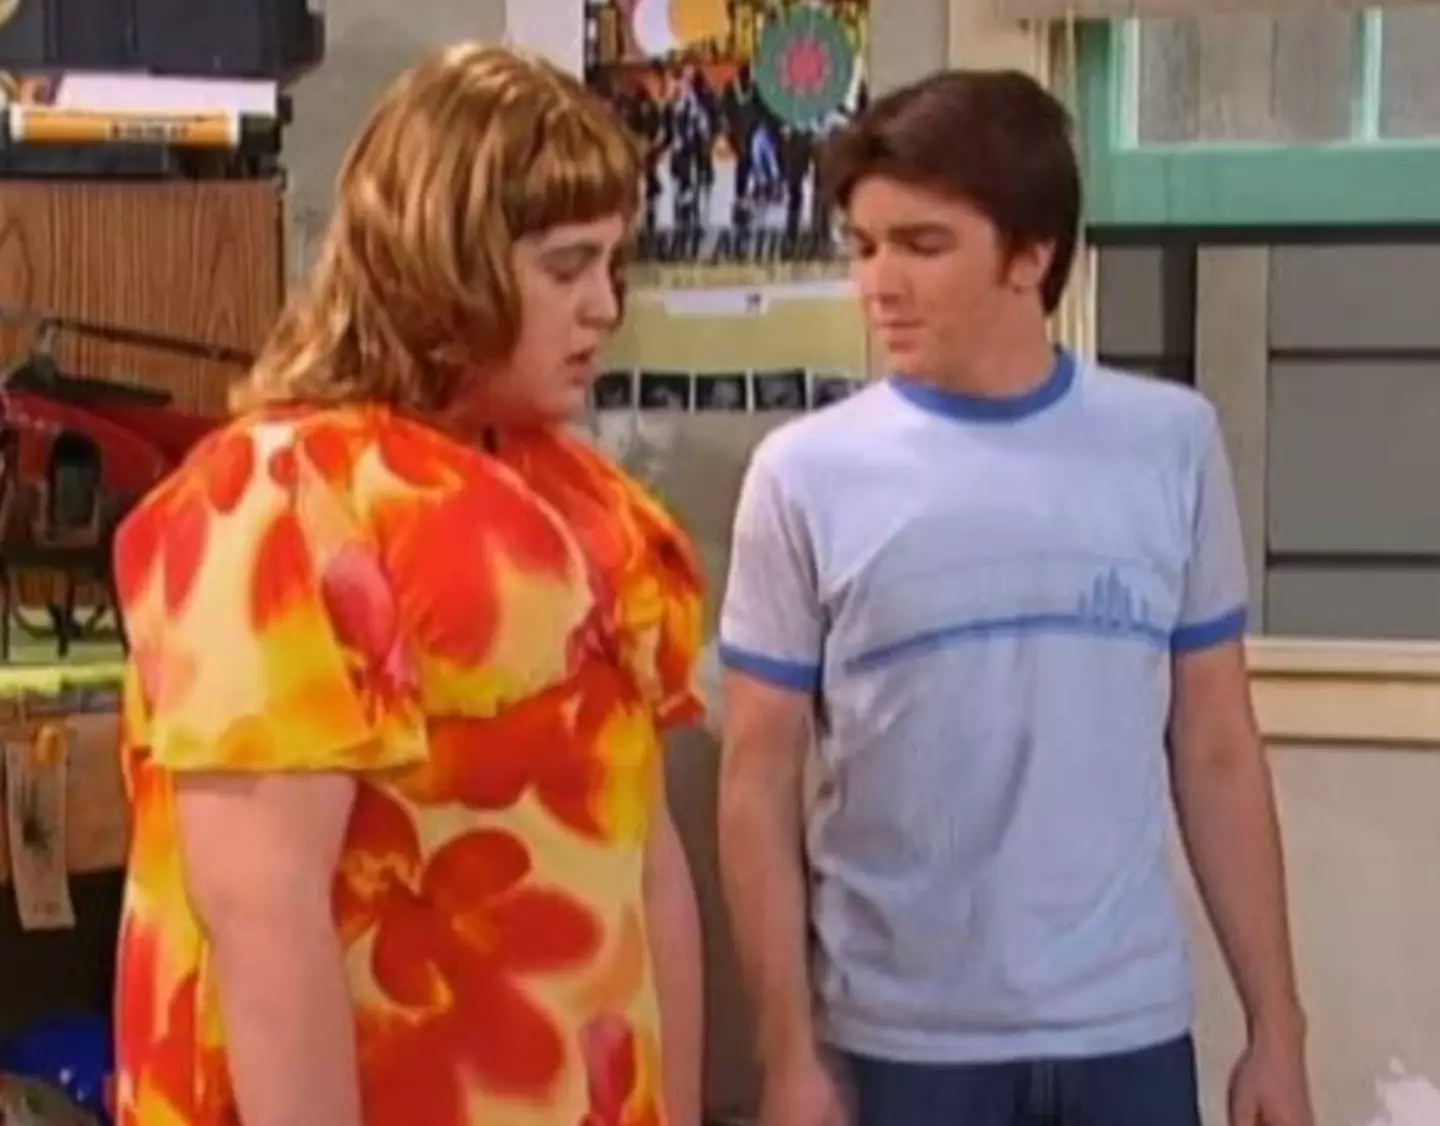 The disguise calls to mind Josh's outfit in Drake and Josh.